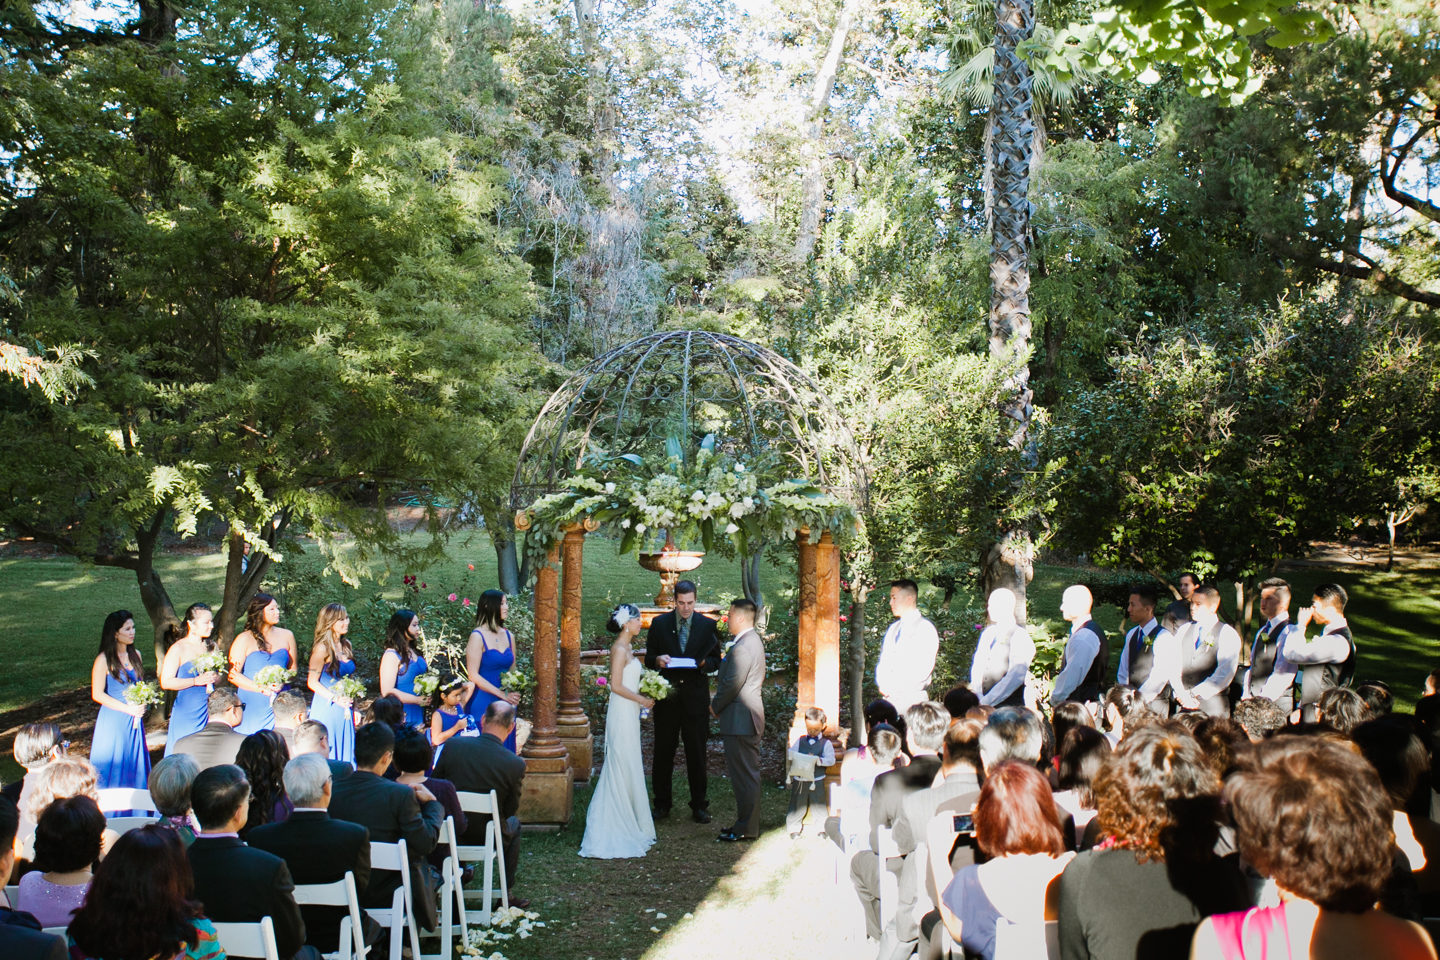 palmdale estate wedding photography; fremont wedding; east bay wedding photographer; tent wedding; 1000 fine events; green and blue wedding; tall centerpieces; green apple centerpieces; first look; outdoor wedding; joel vanz; large bridal party